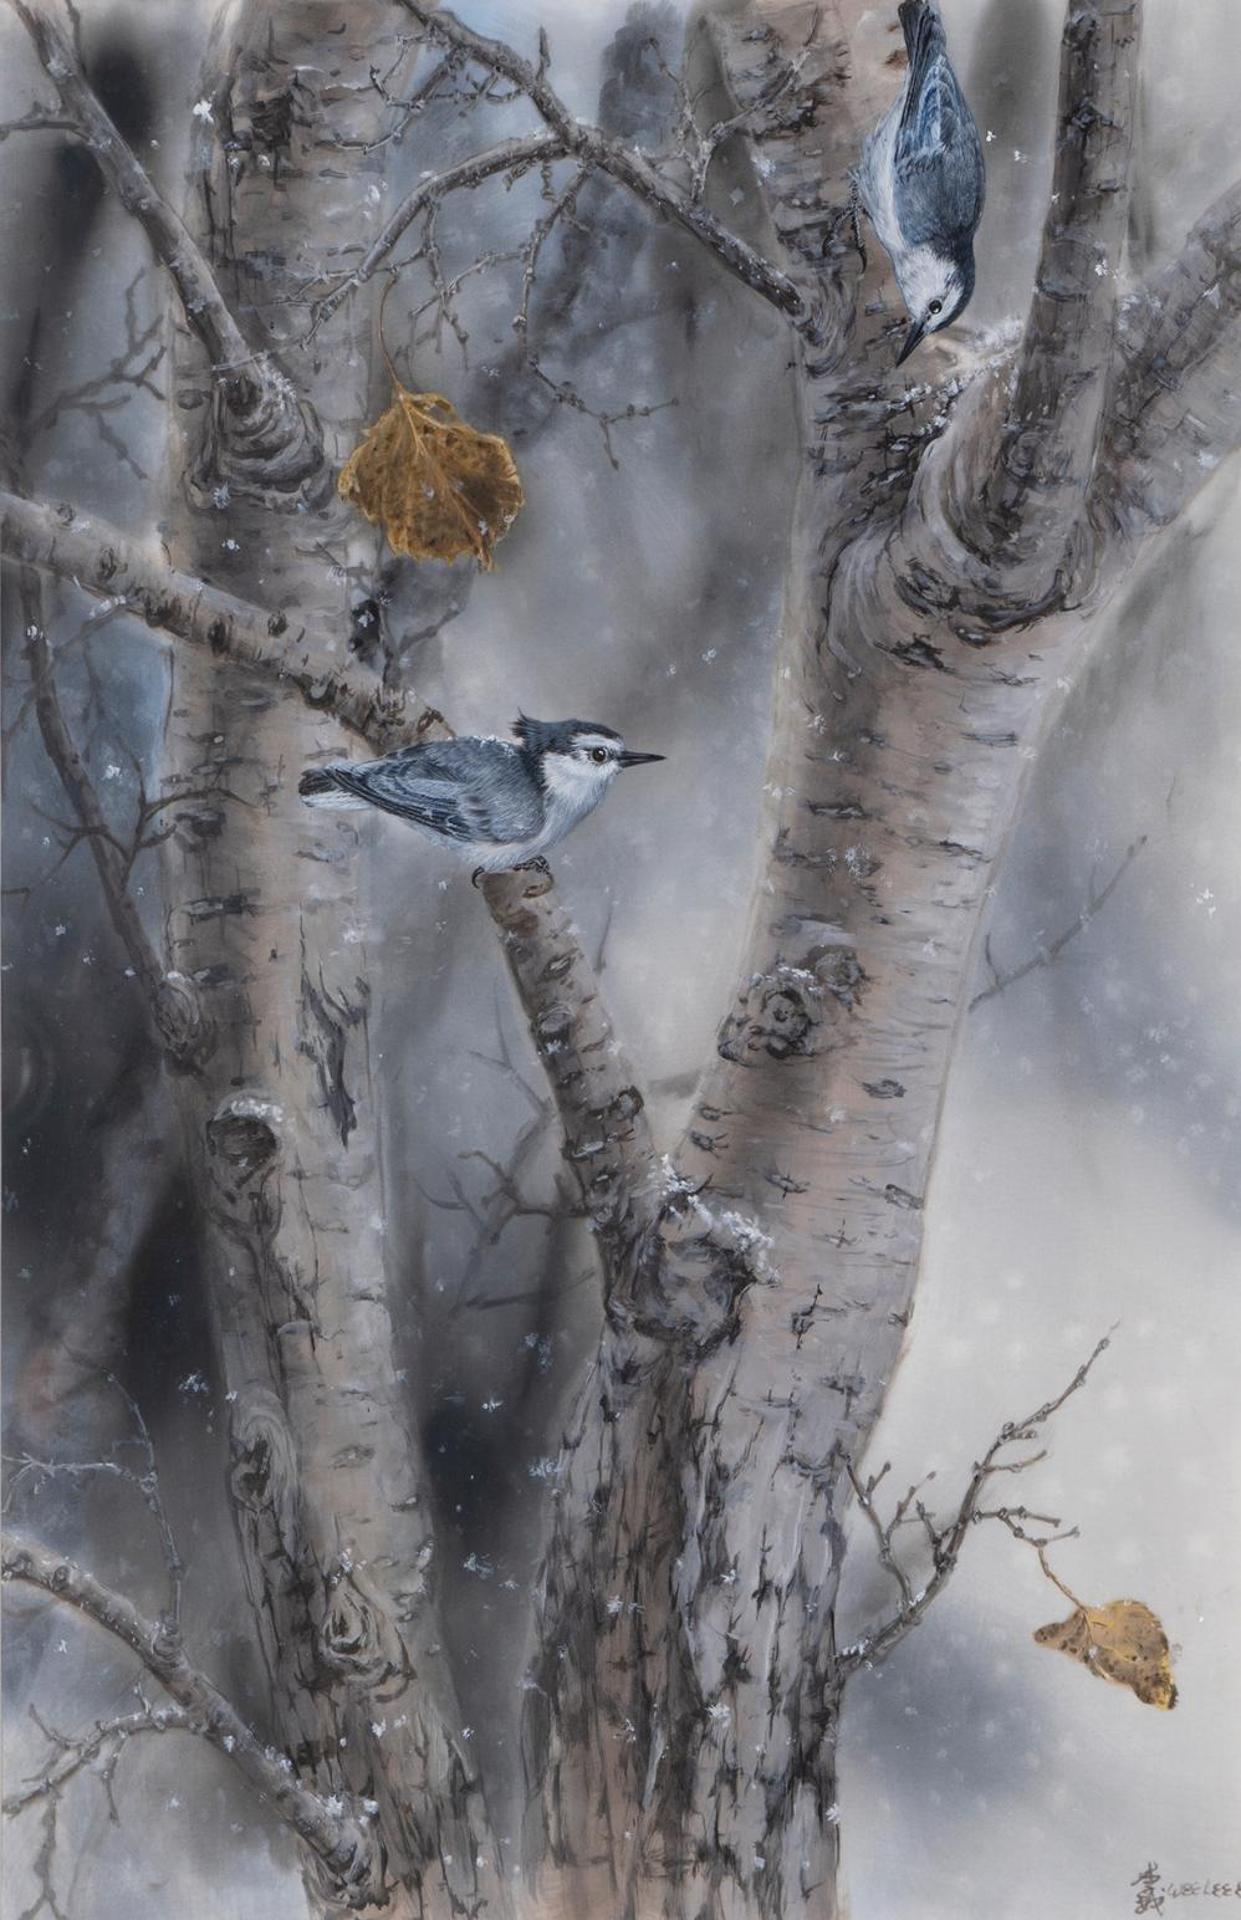 Wee Lee (1955) - On a Snowy Day (White-Breasted Nuthatch)